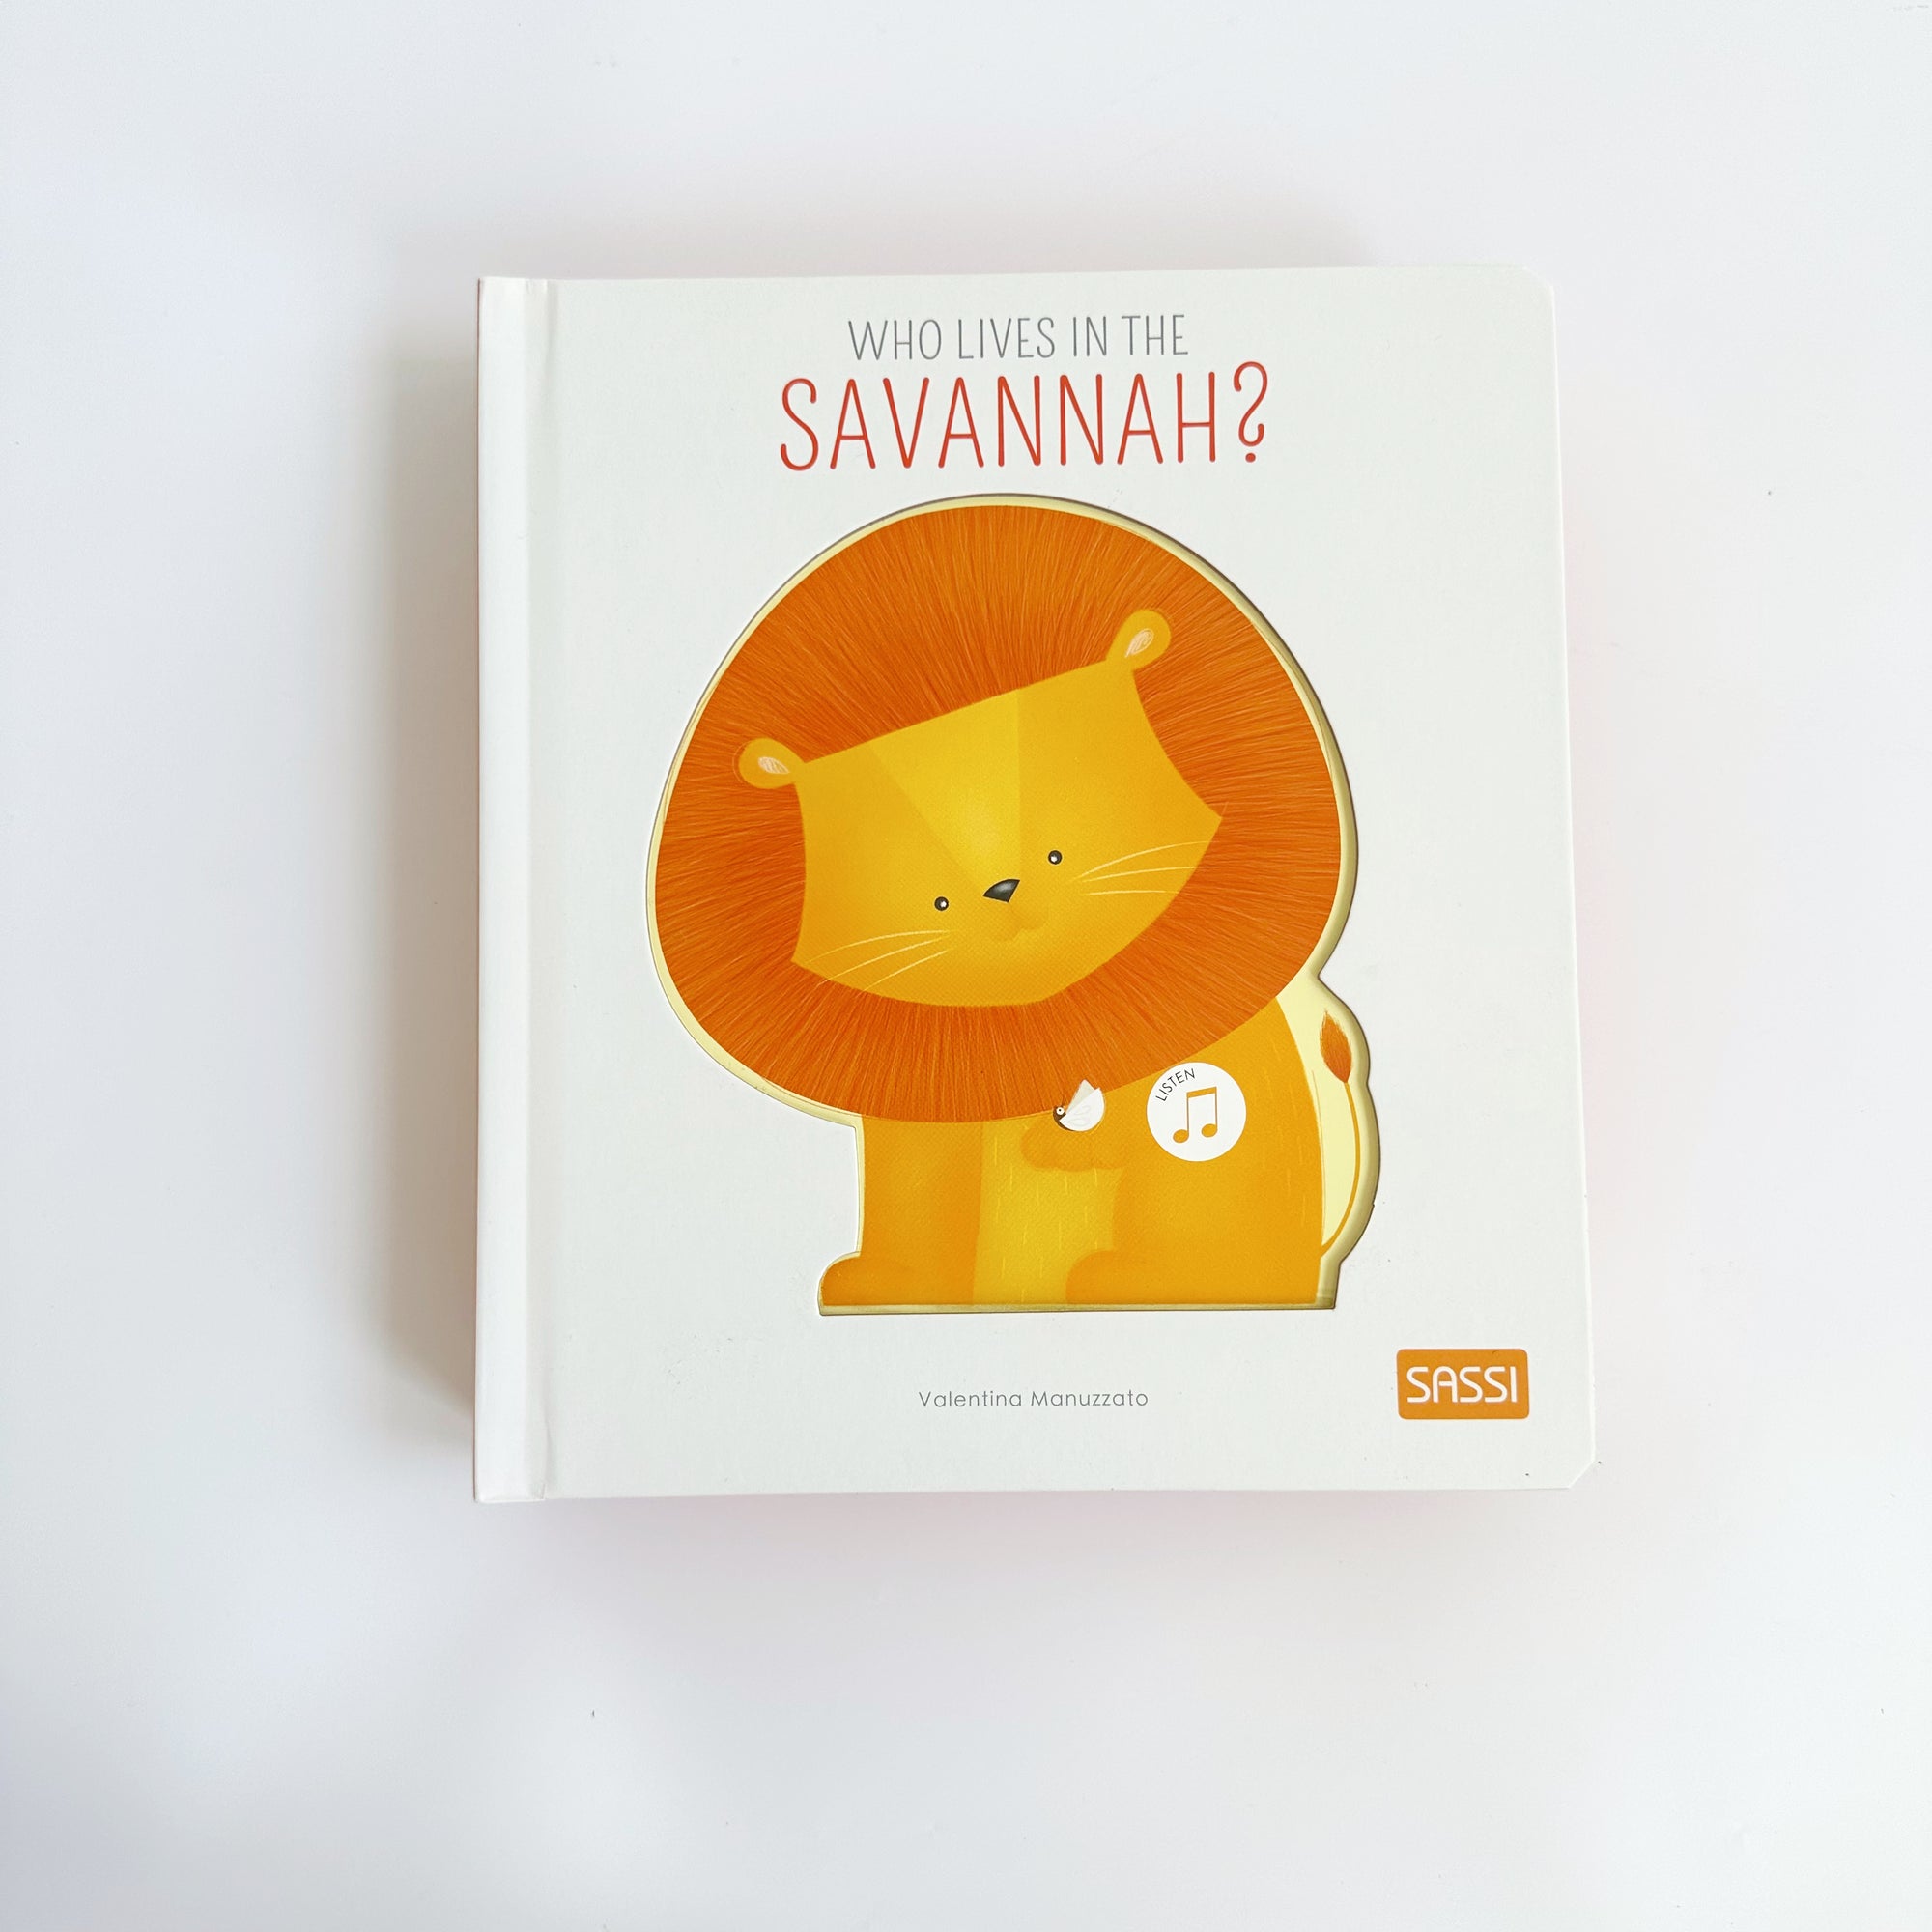 SASSI SOUND BOOK: WHO LIVES IN THE SAVANNAH